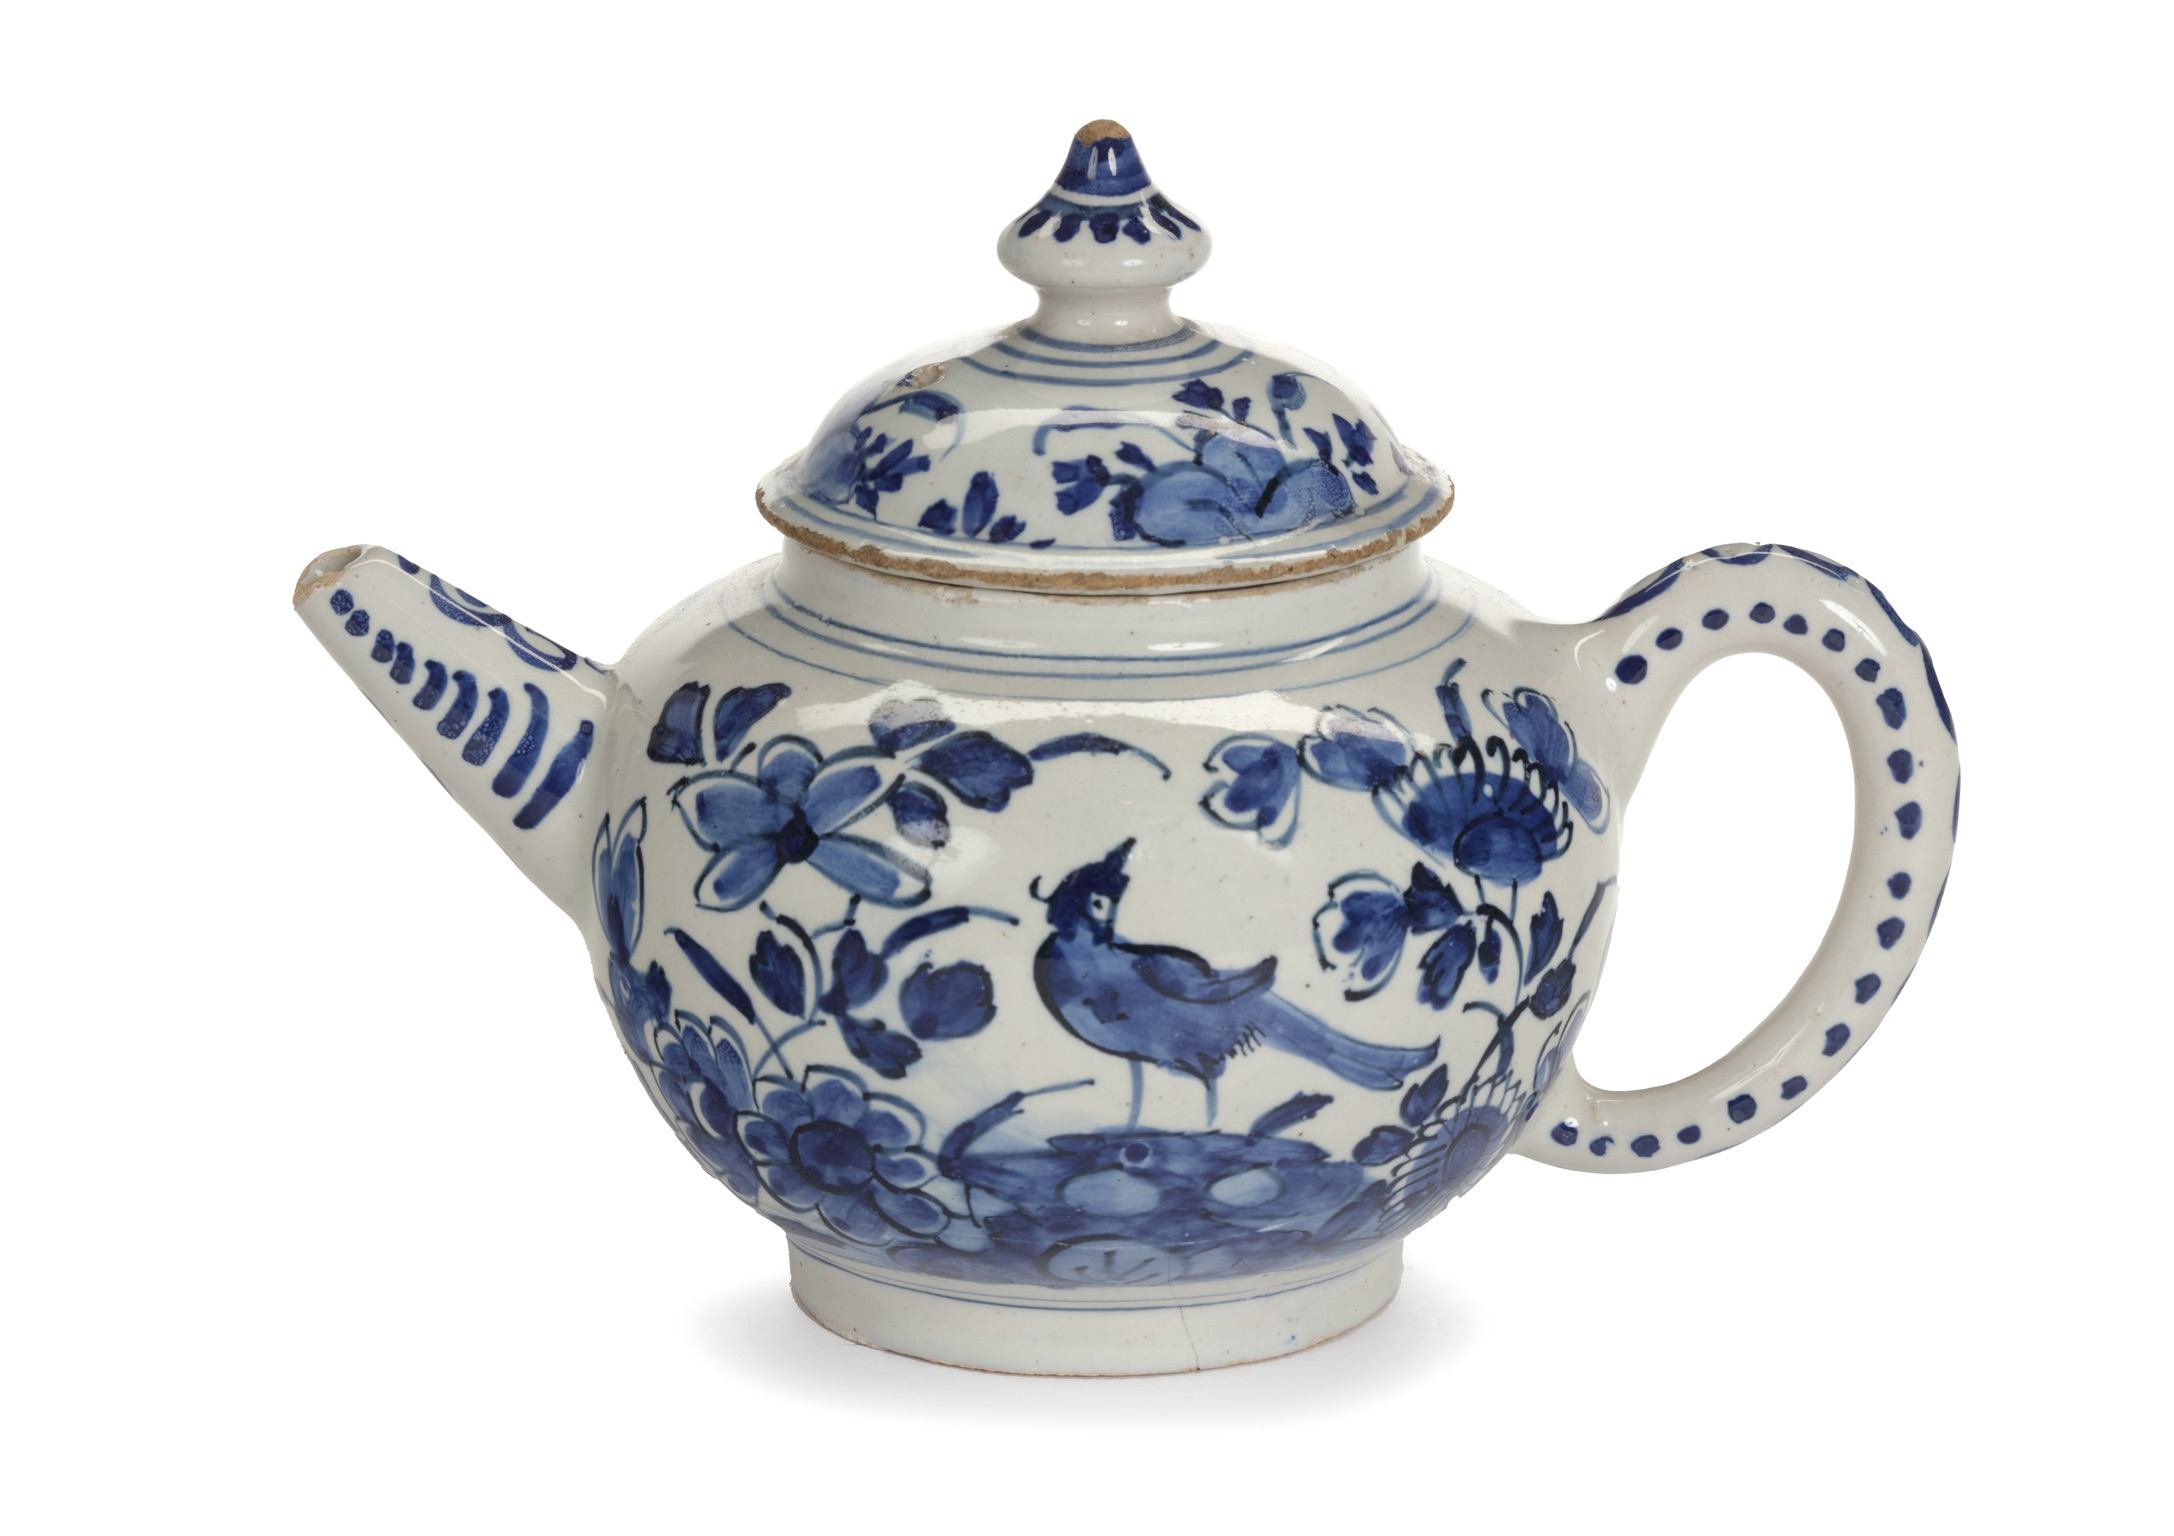 D2326. Blue and White Teapot and Cover